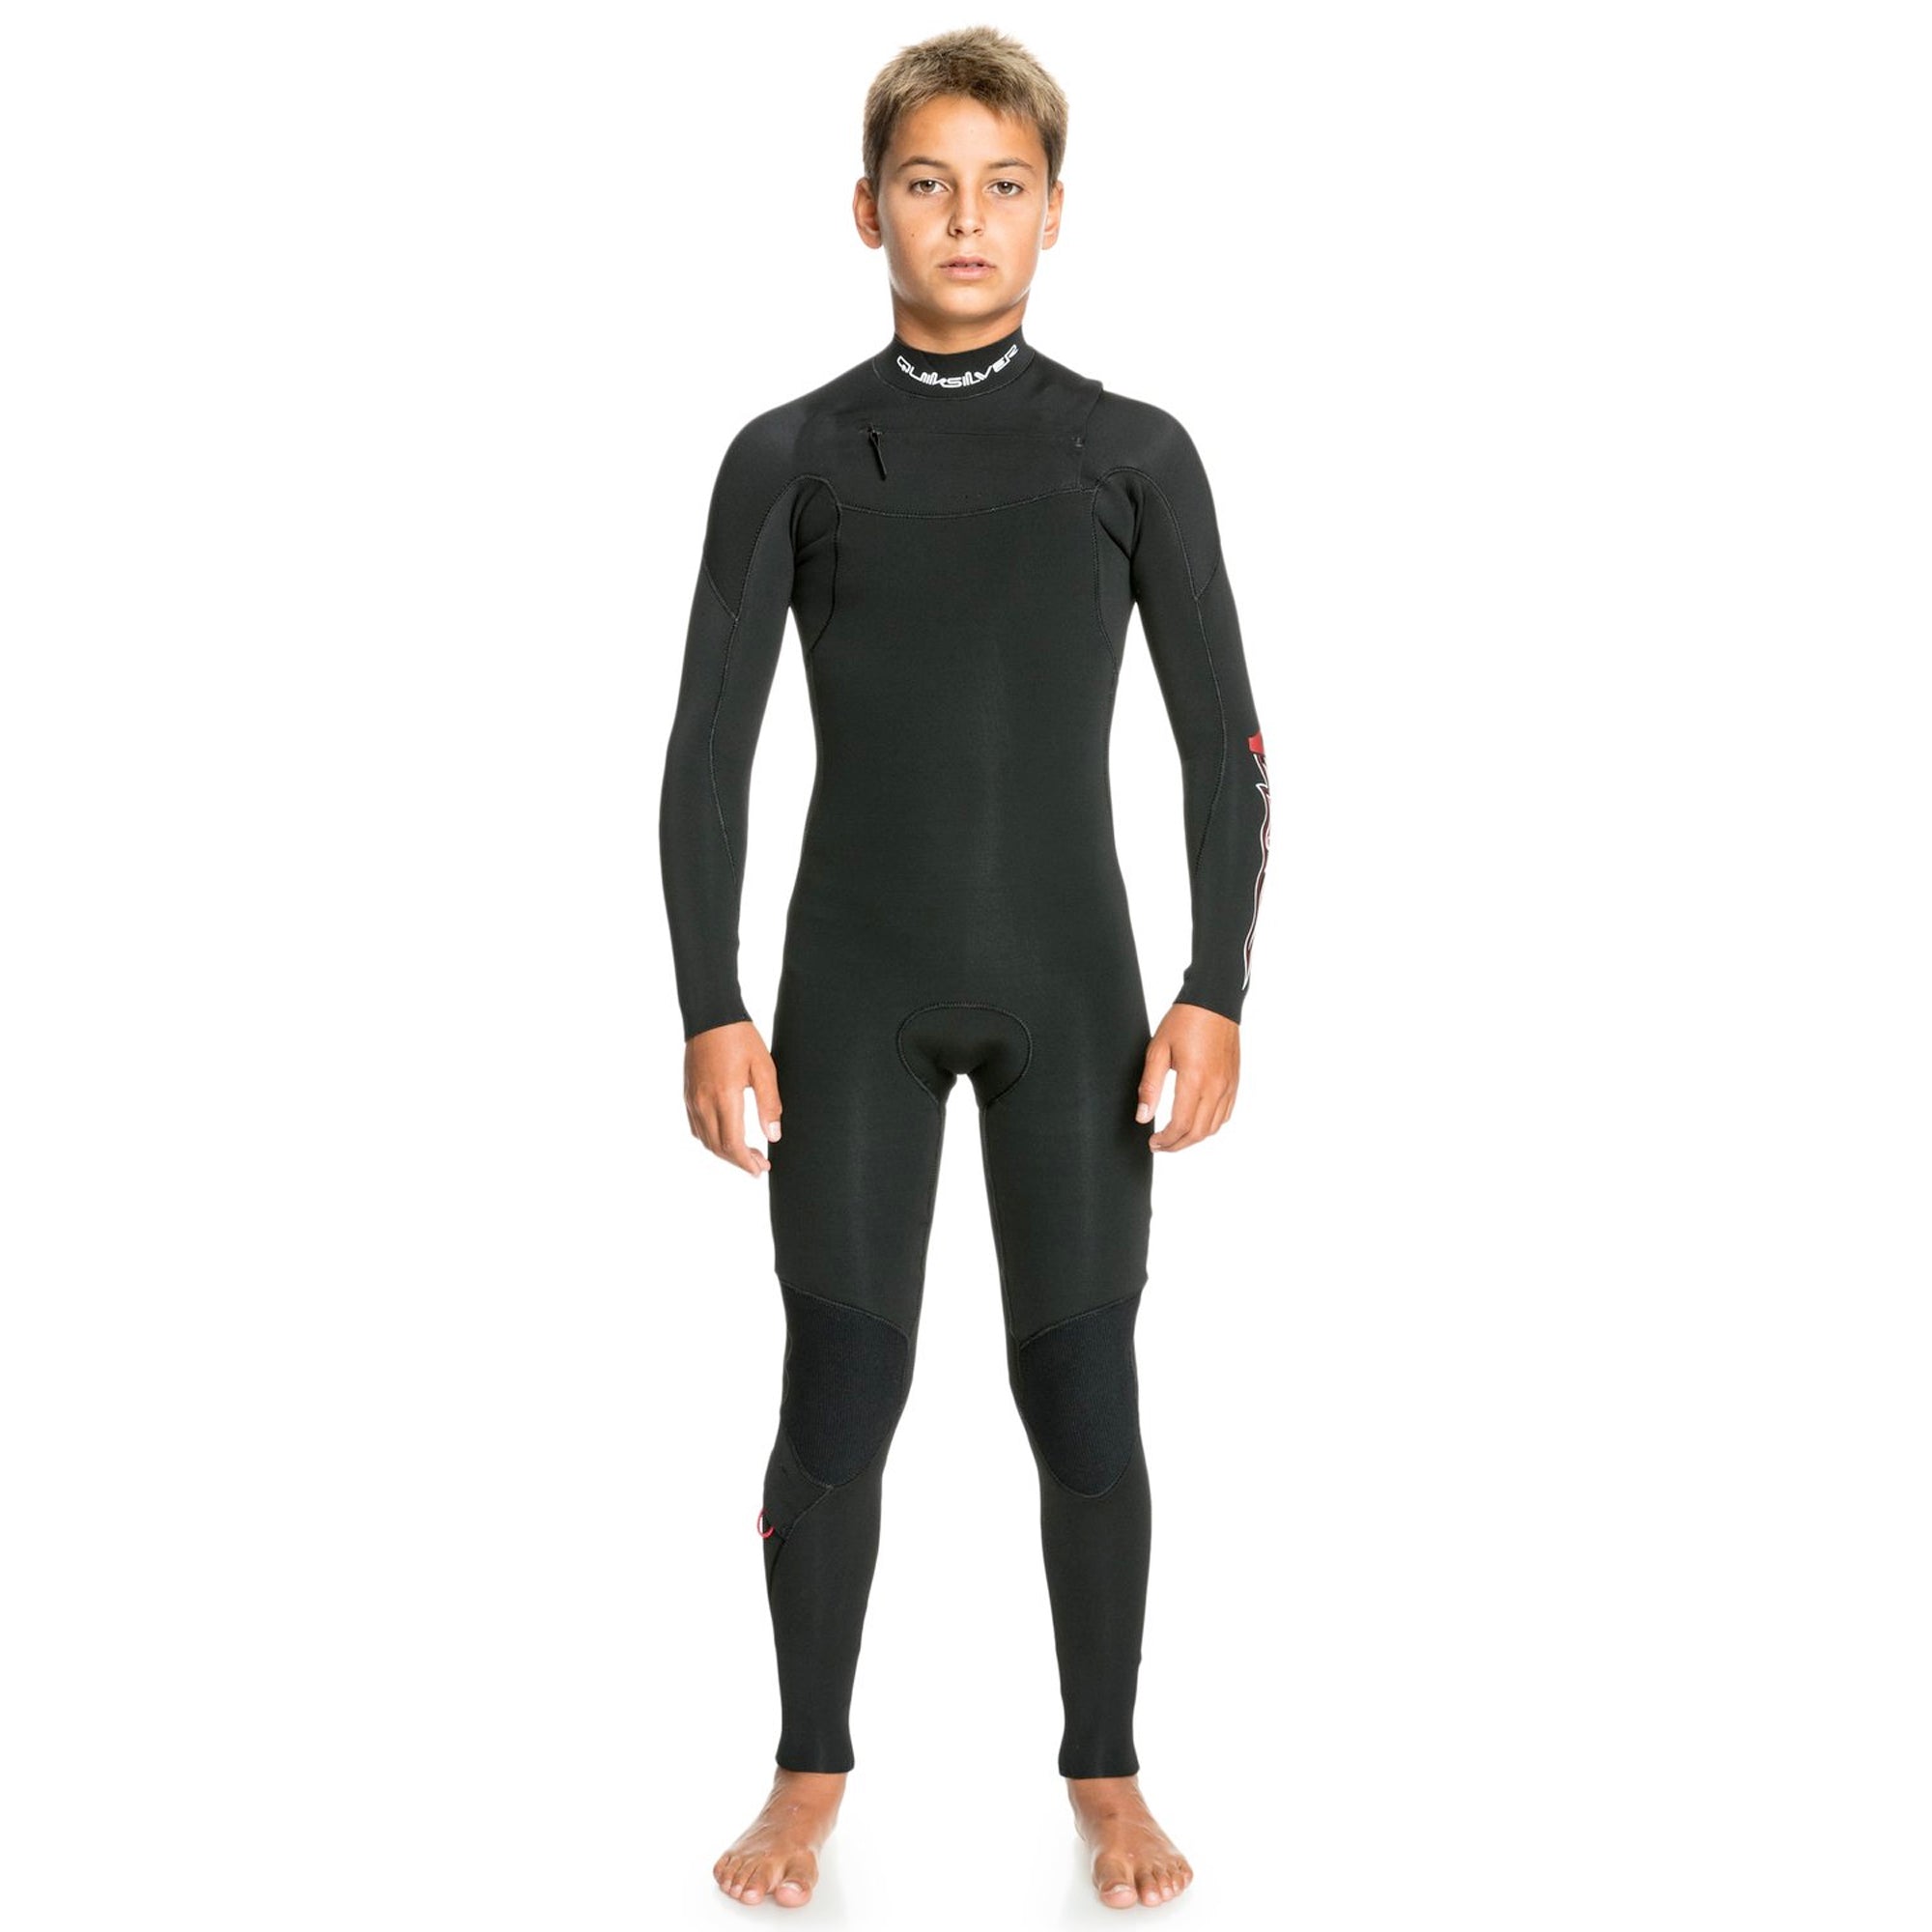 Quiksilver 3/2 Capsule Everyday Sessions Chest-Zip Youth Boy's Fullsuit Wetsuit